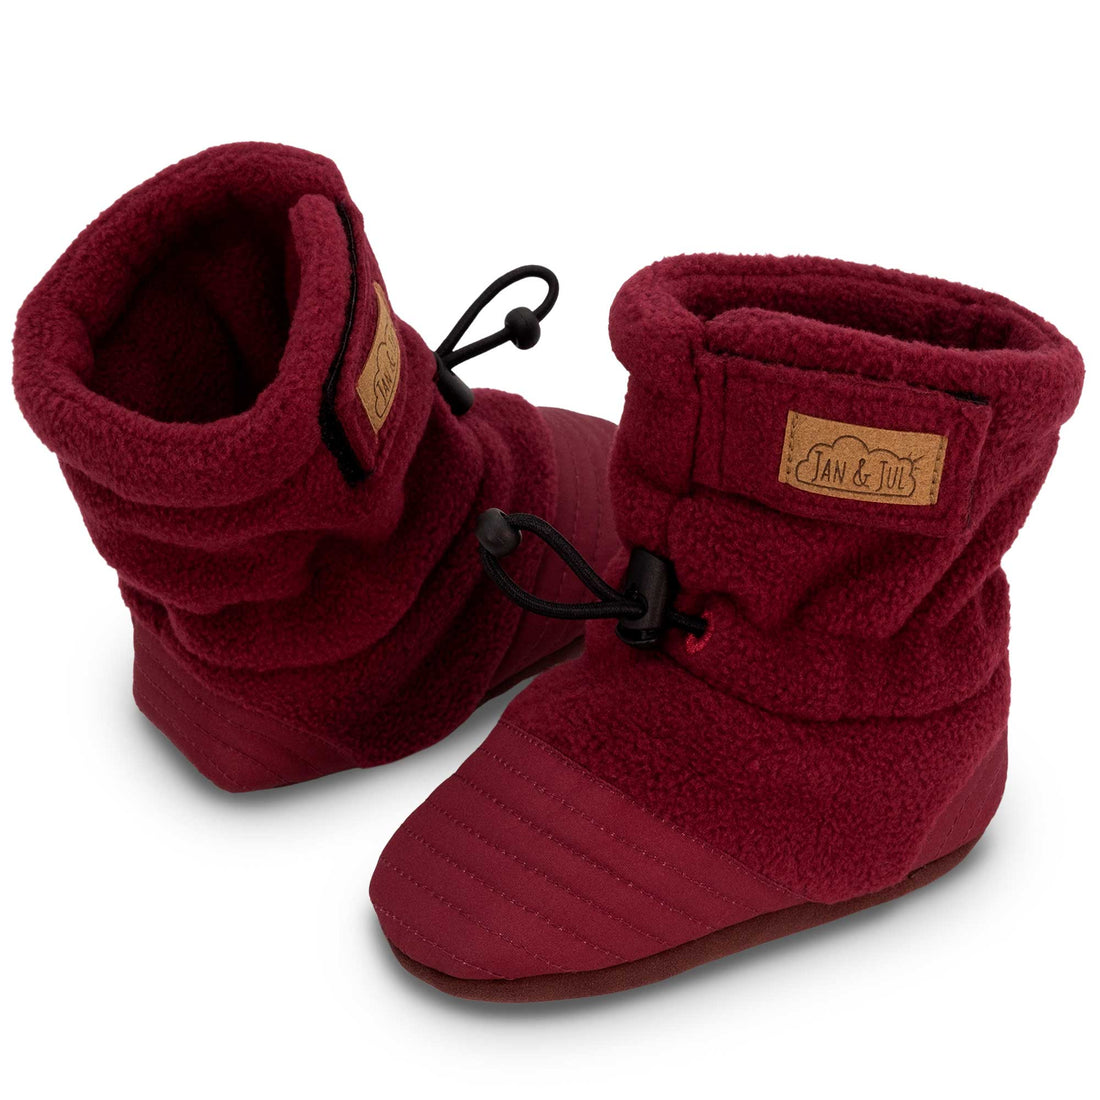 Stay Put Cozy Booties